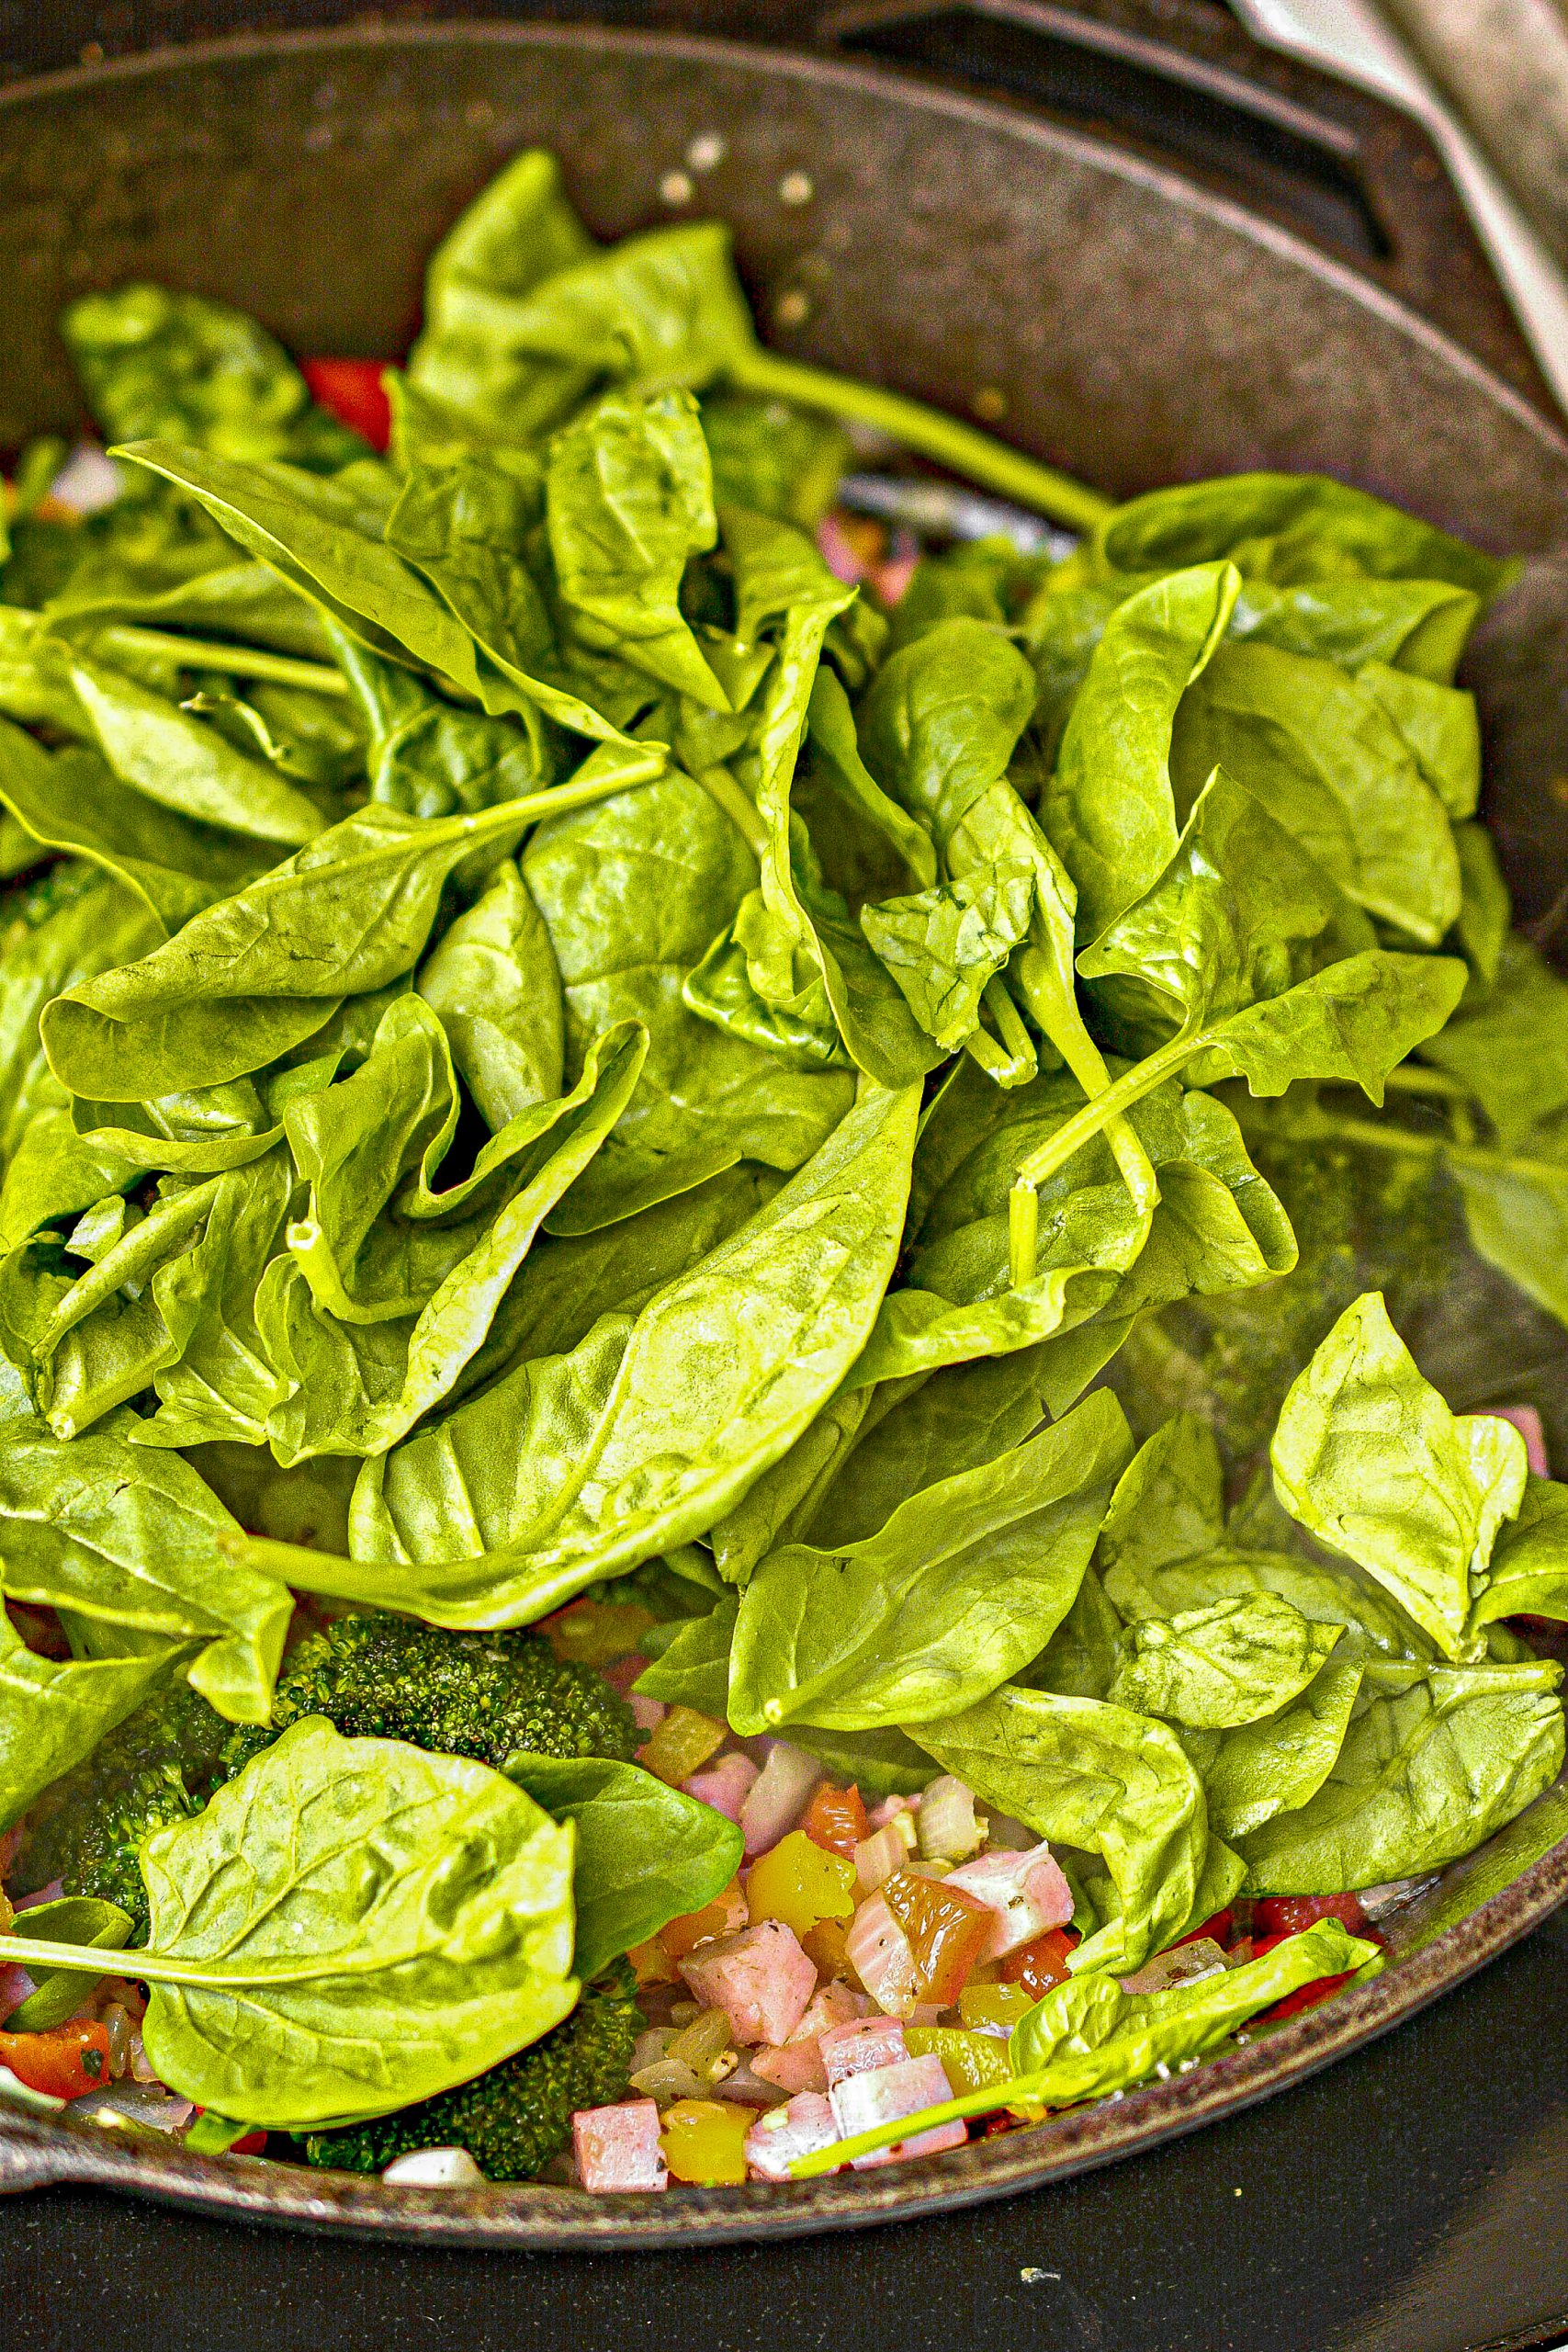 Place the spinach into the skillet, and cook until it is just wilted.